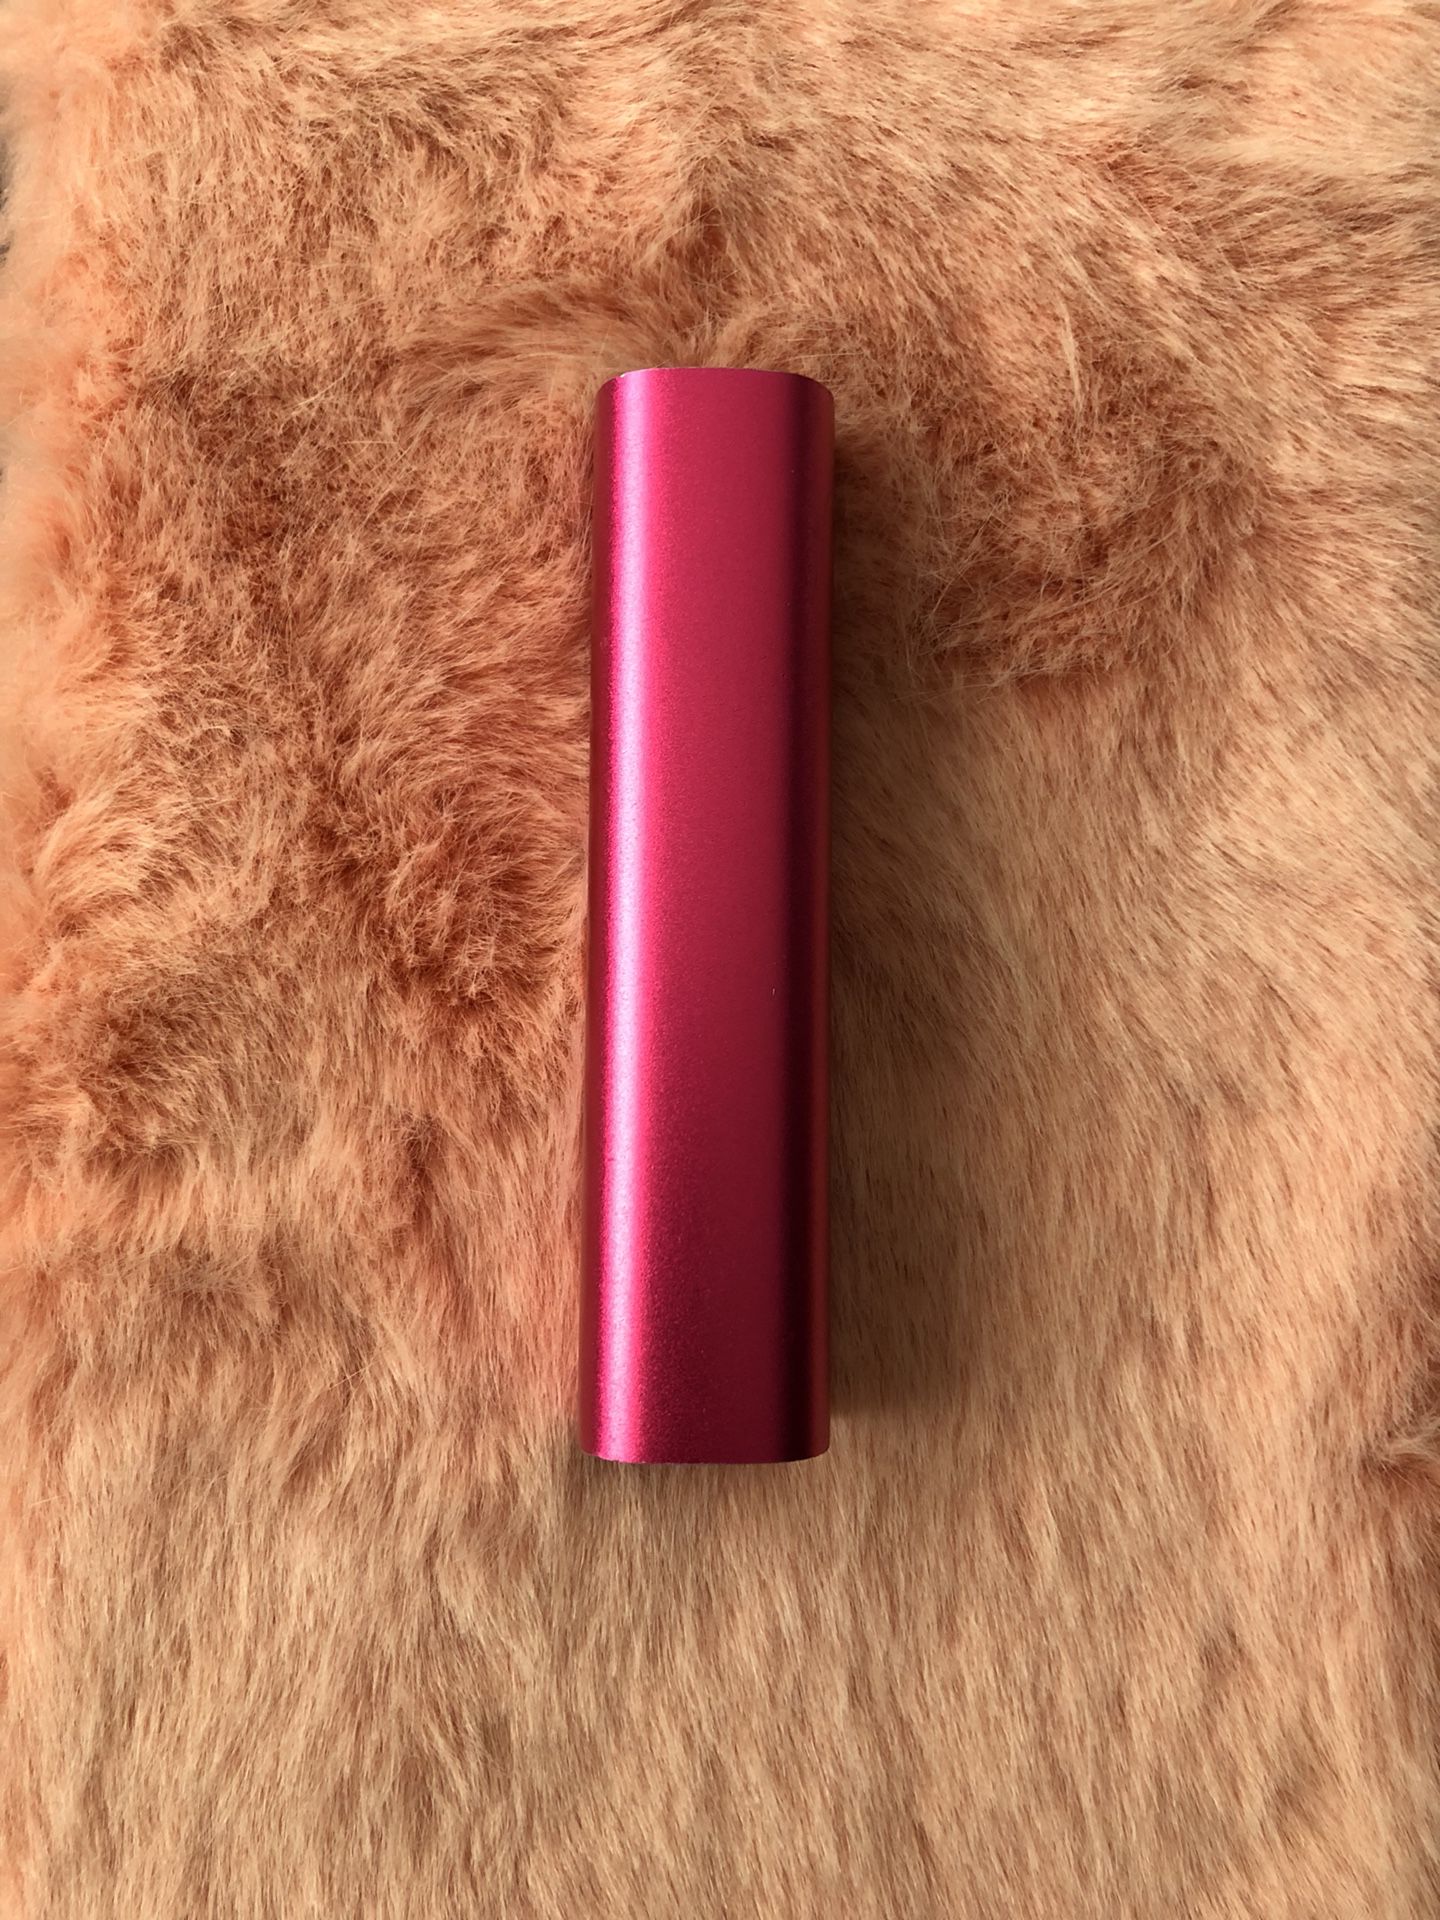 Brand new portable charger!